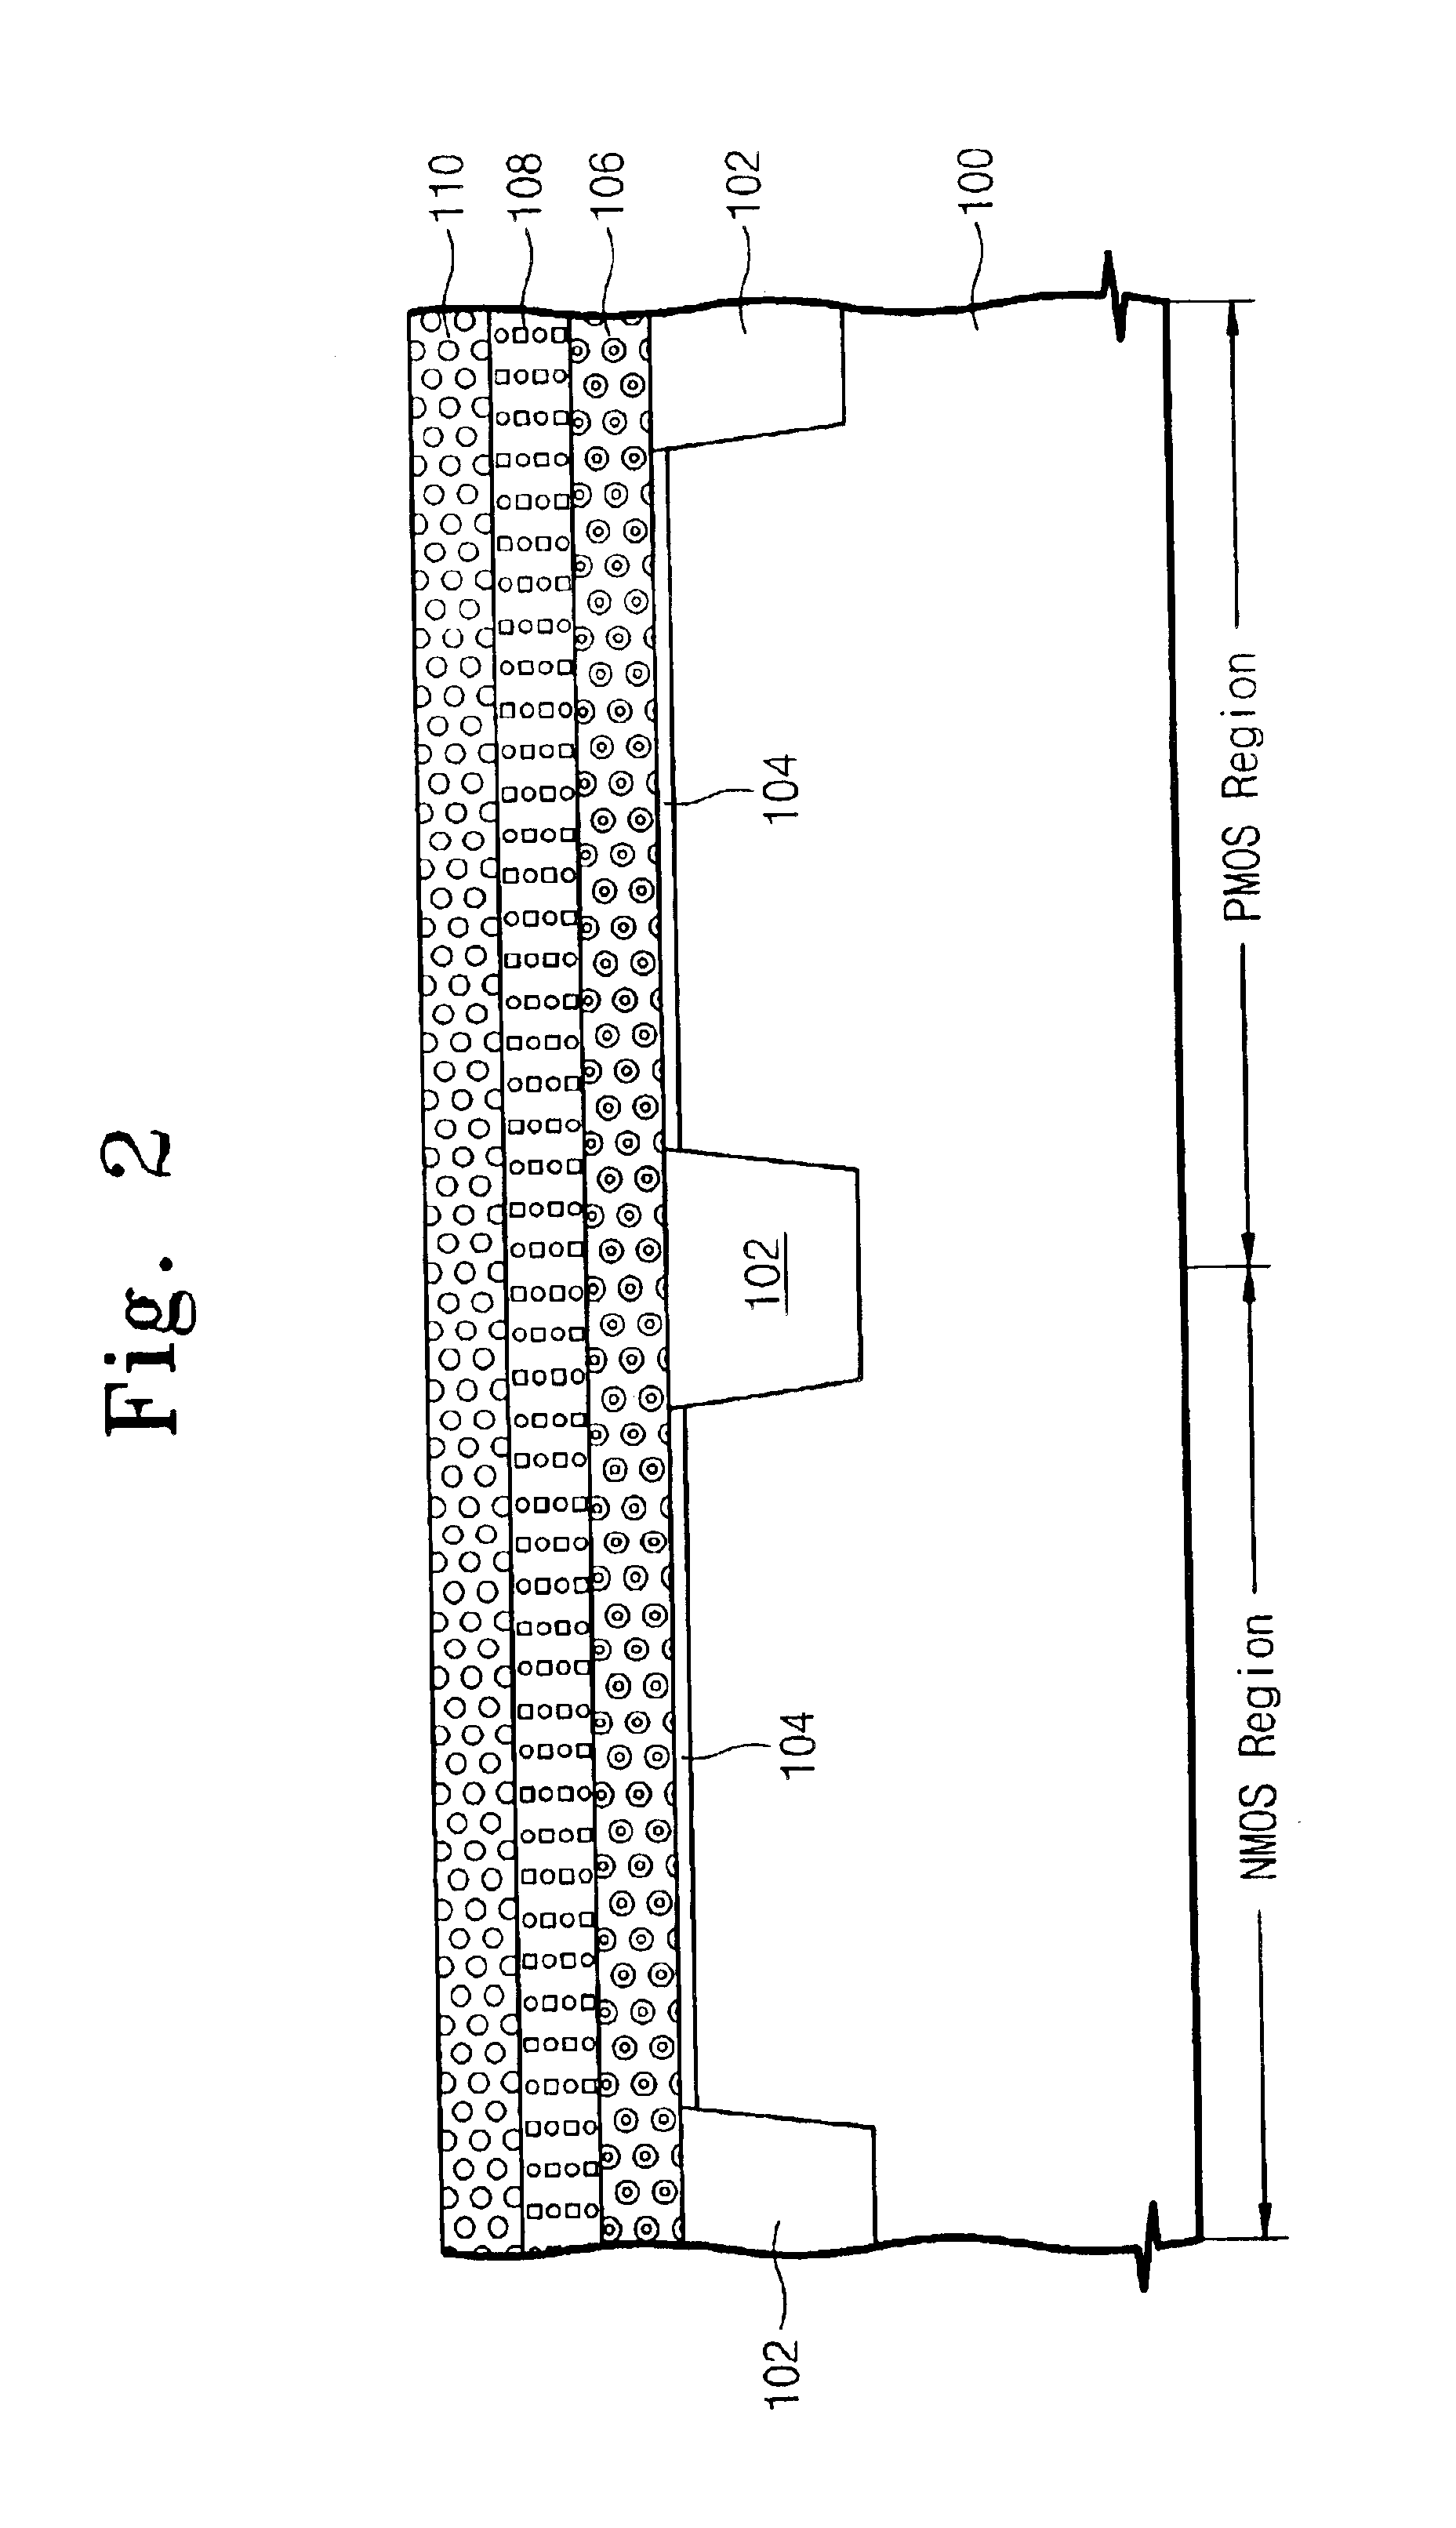 CMOS transistor having different PMOS and NMOS gate electrode structures and method of fabrication thereof